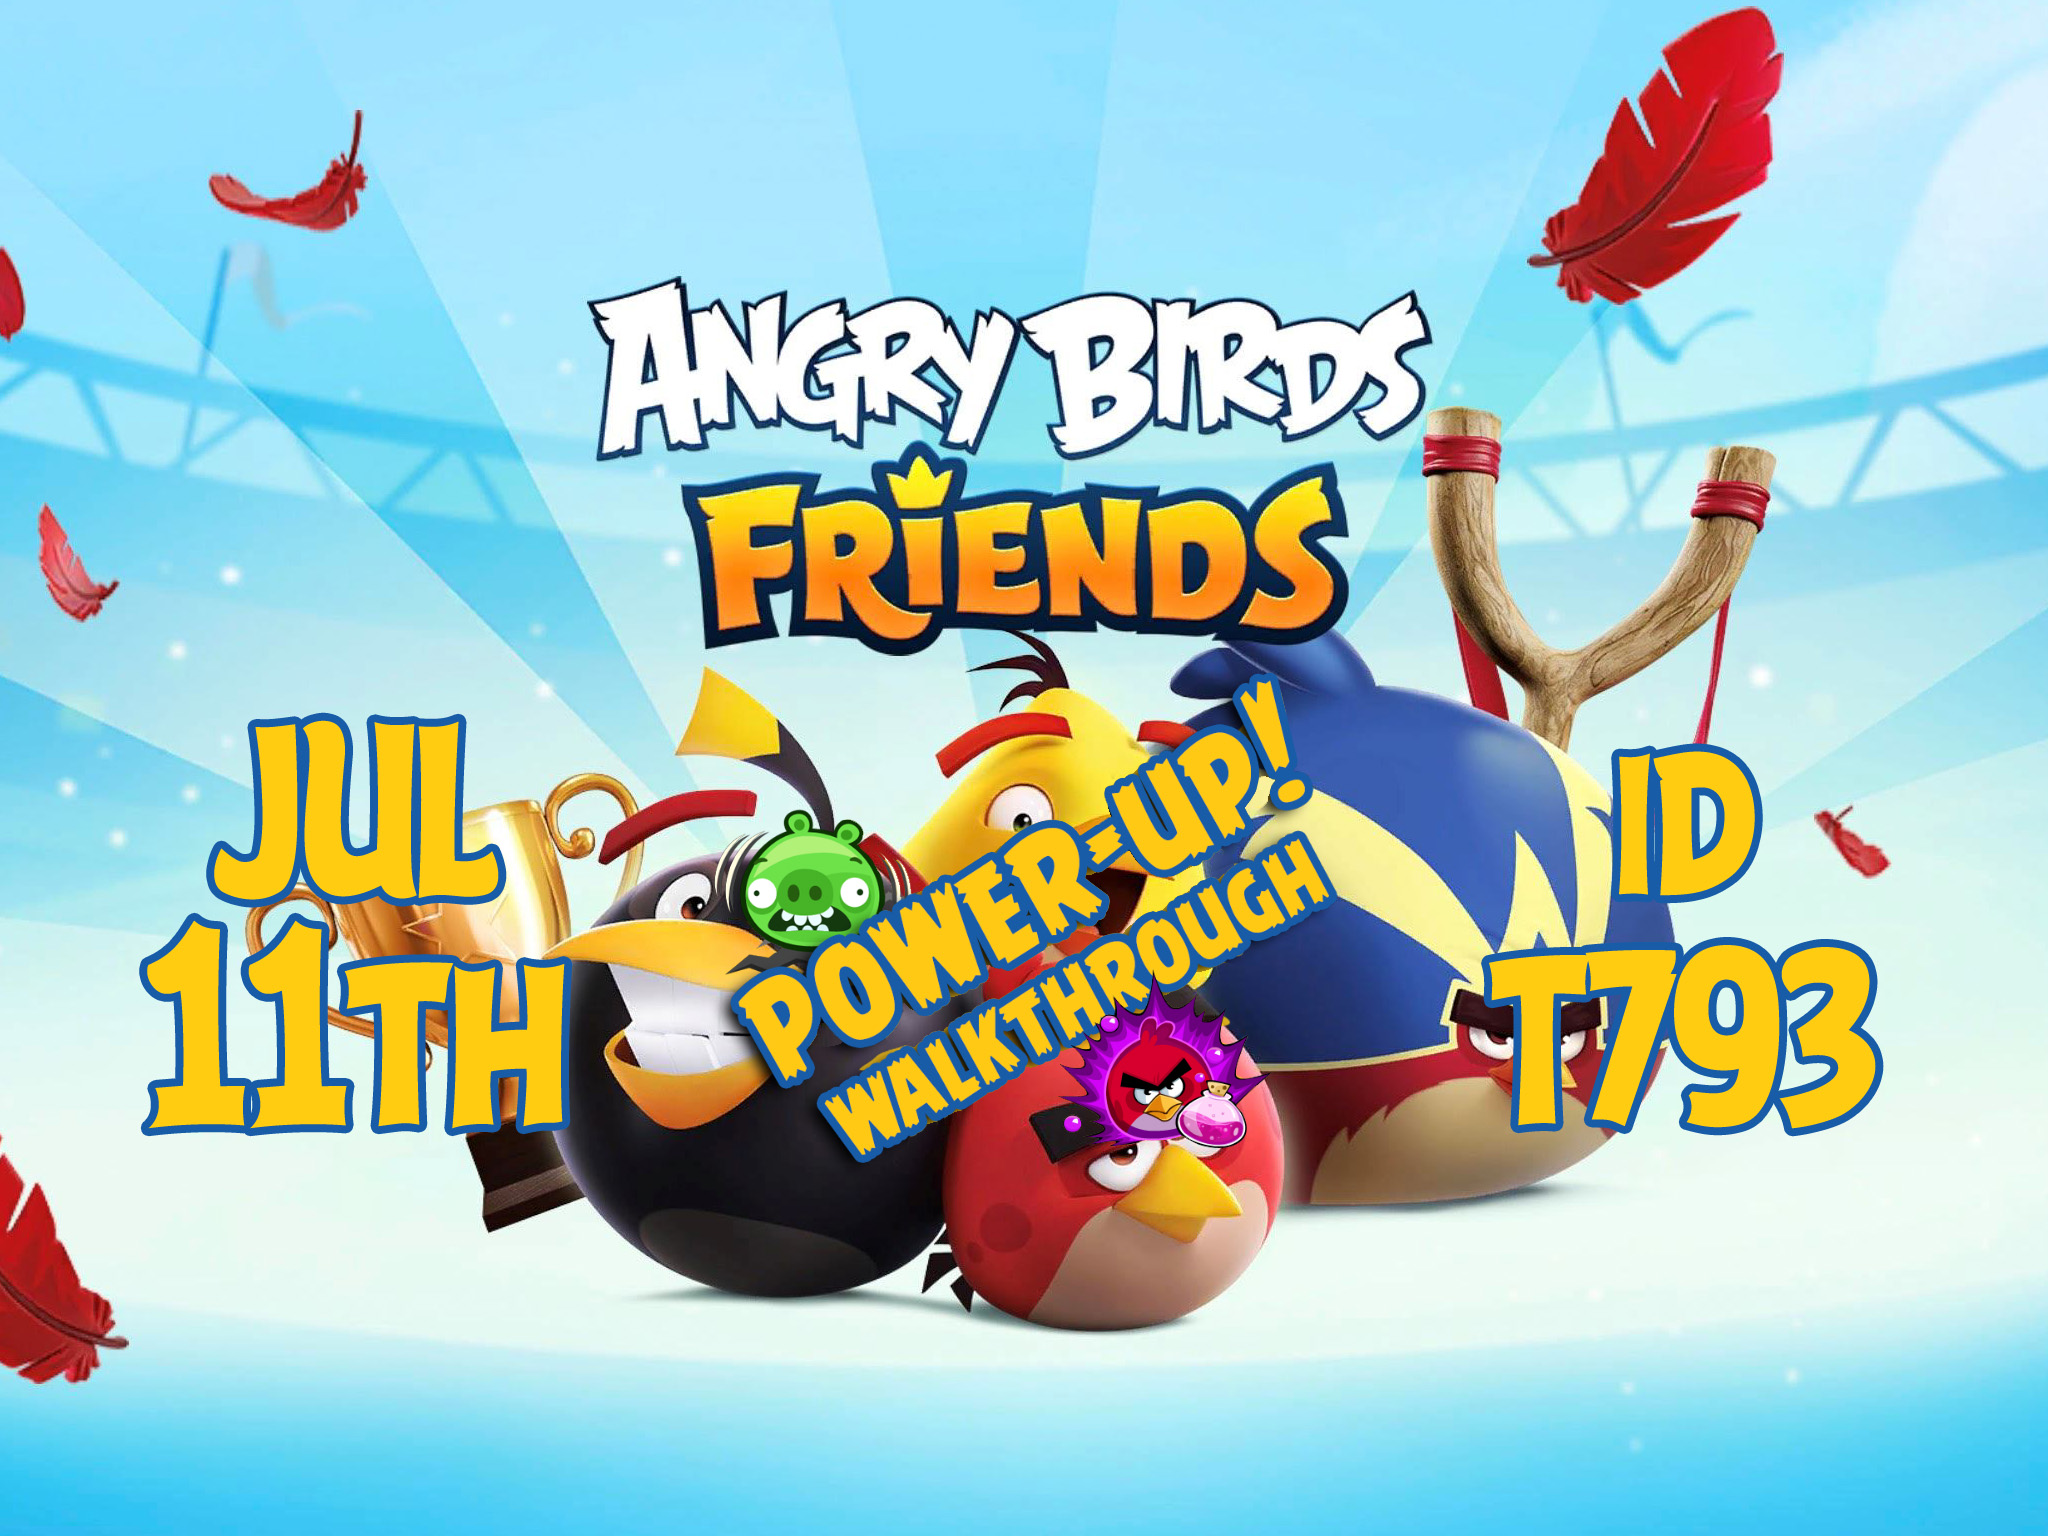 Angry-Birds-Friends-Tournament-T793-Feature-Image-PU